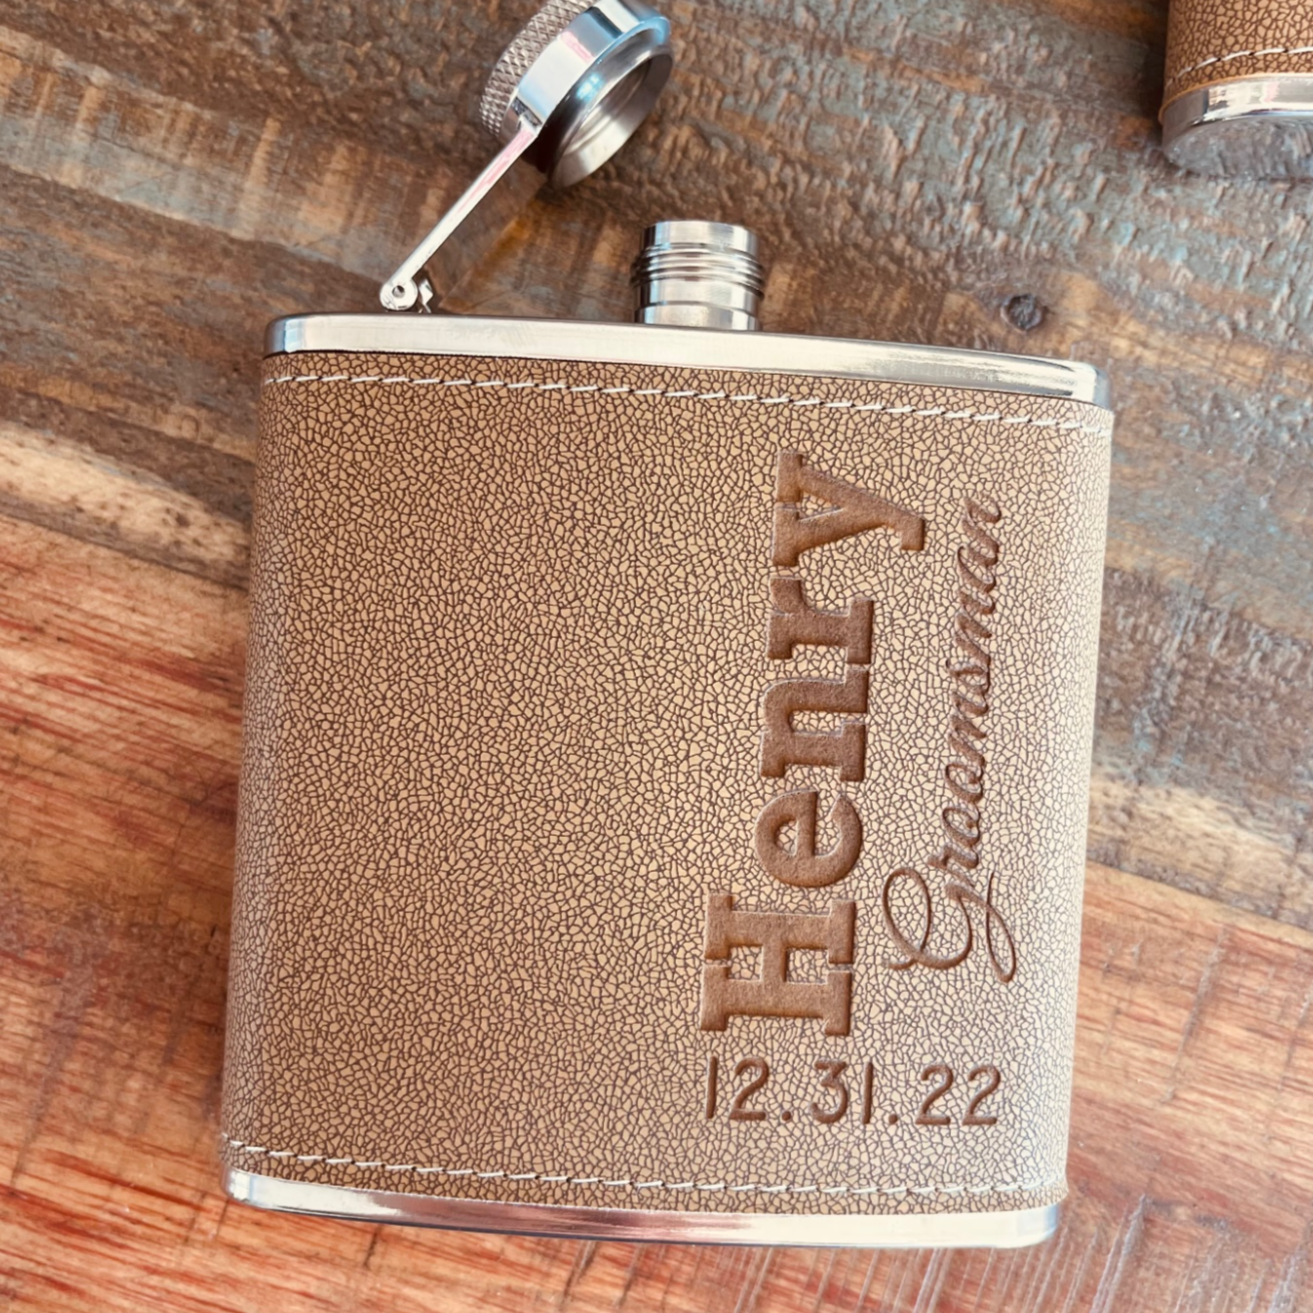 Personalized Flasks